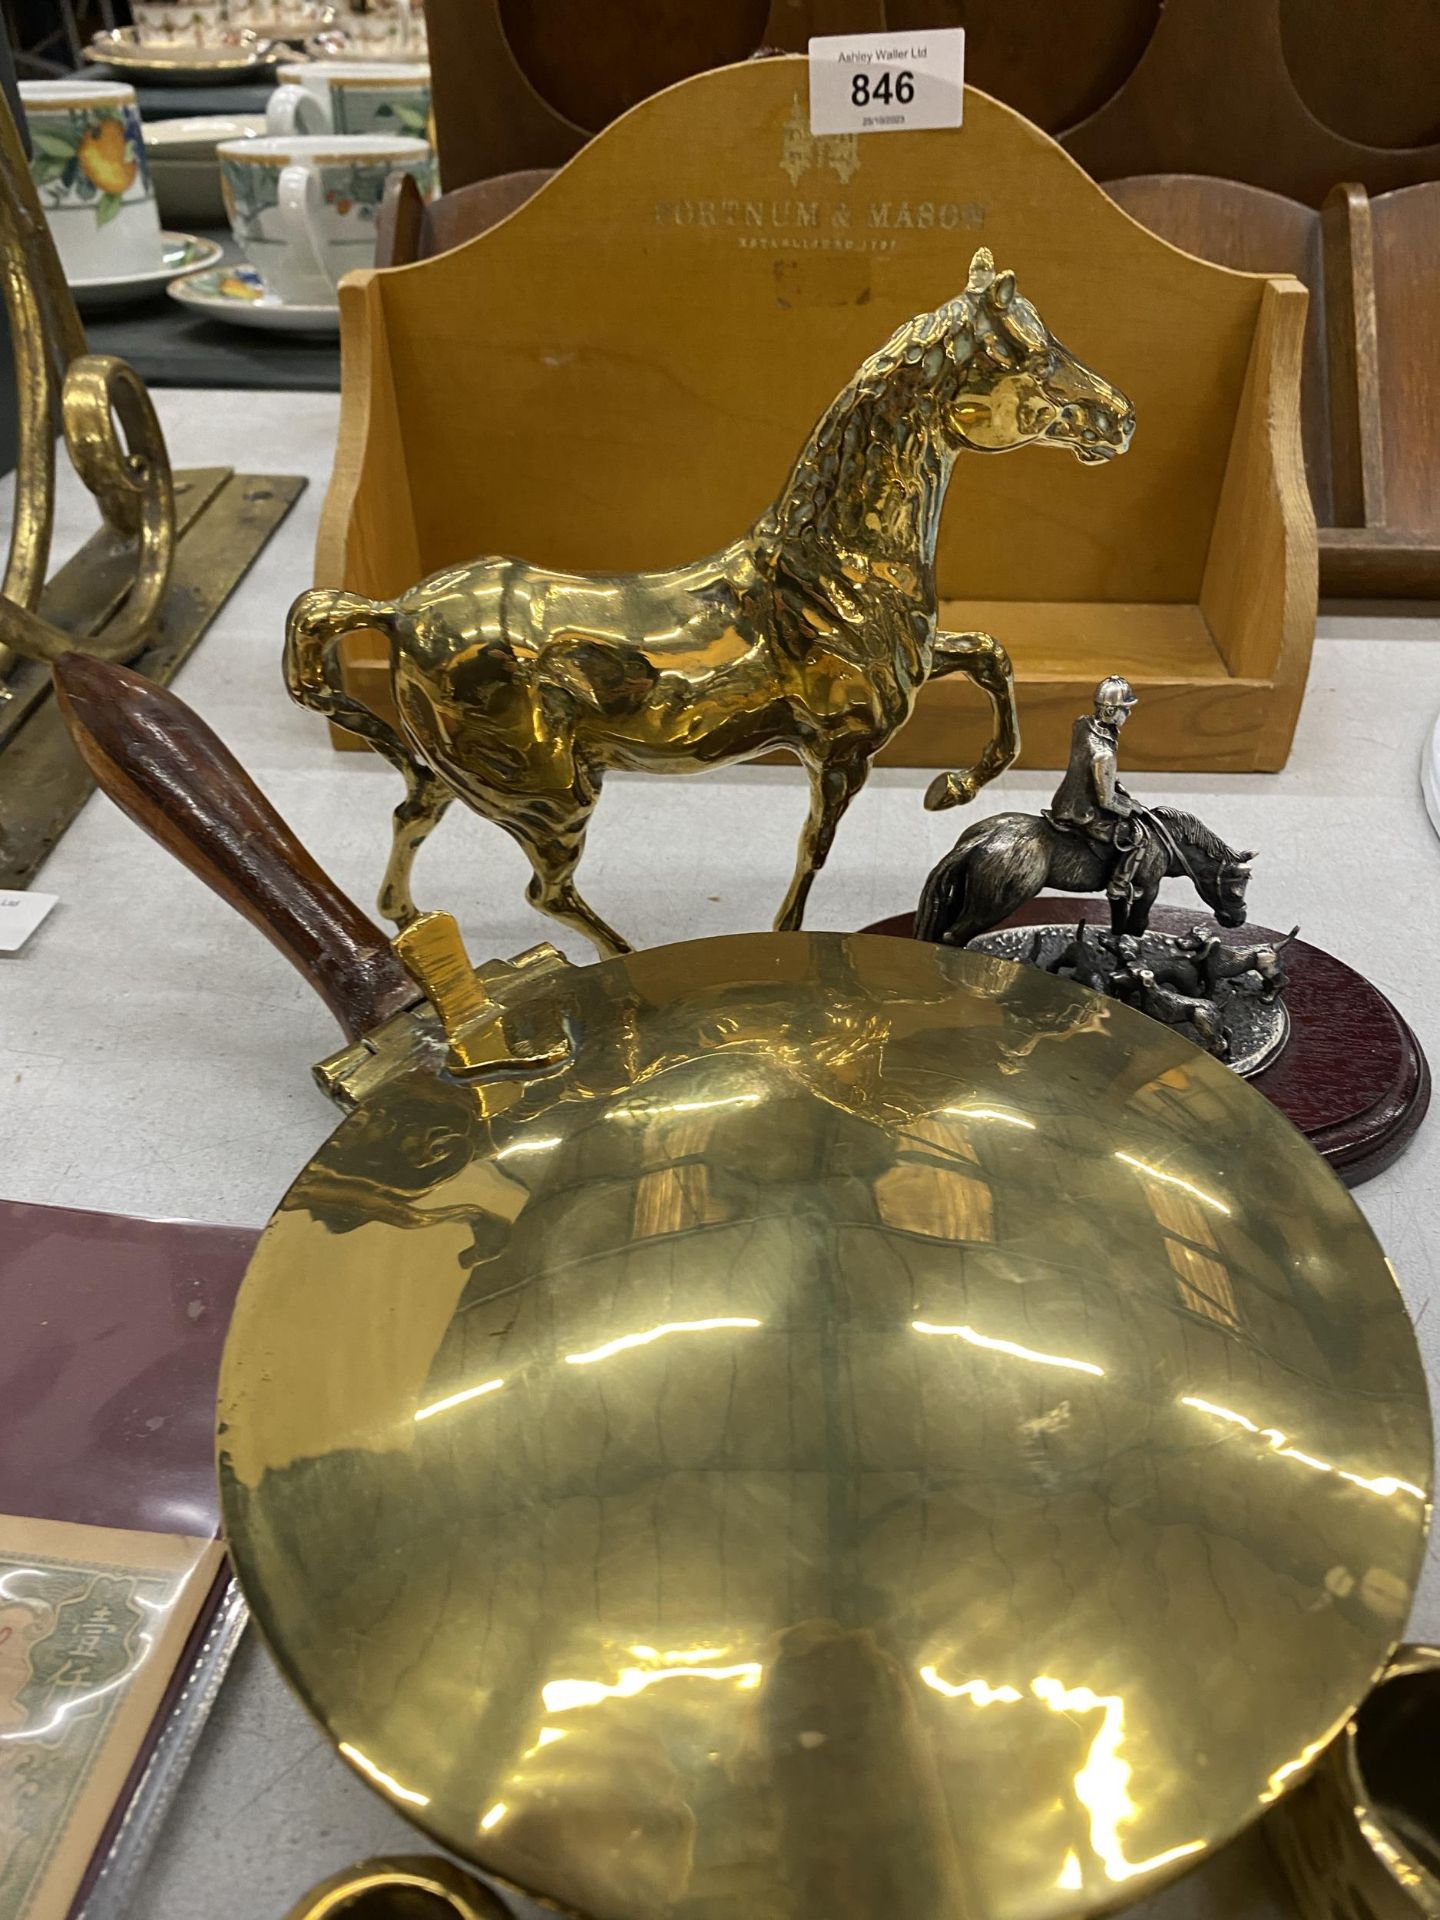 A QUANTITY OF BRASSWARE TO INCLUDE A LIDDED PAN, HORSE, SHOES AND A BELL PLUS A SMALL PEWTER TABLEAU - Image 3 of 3